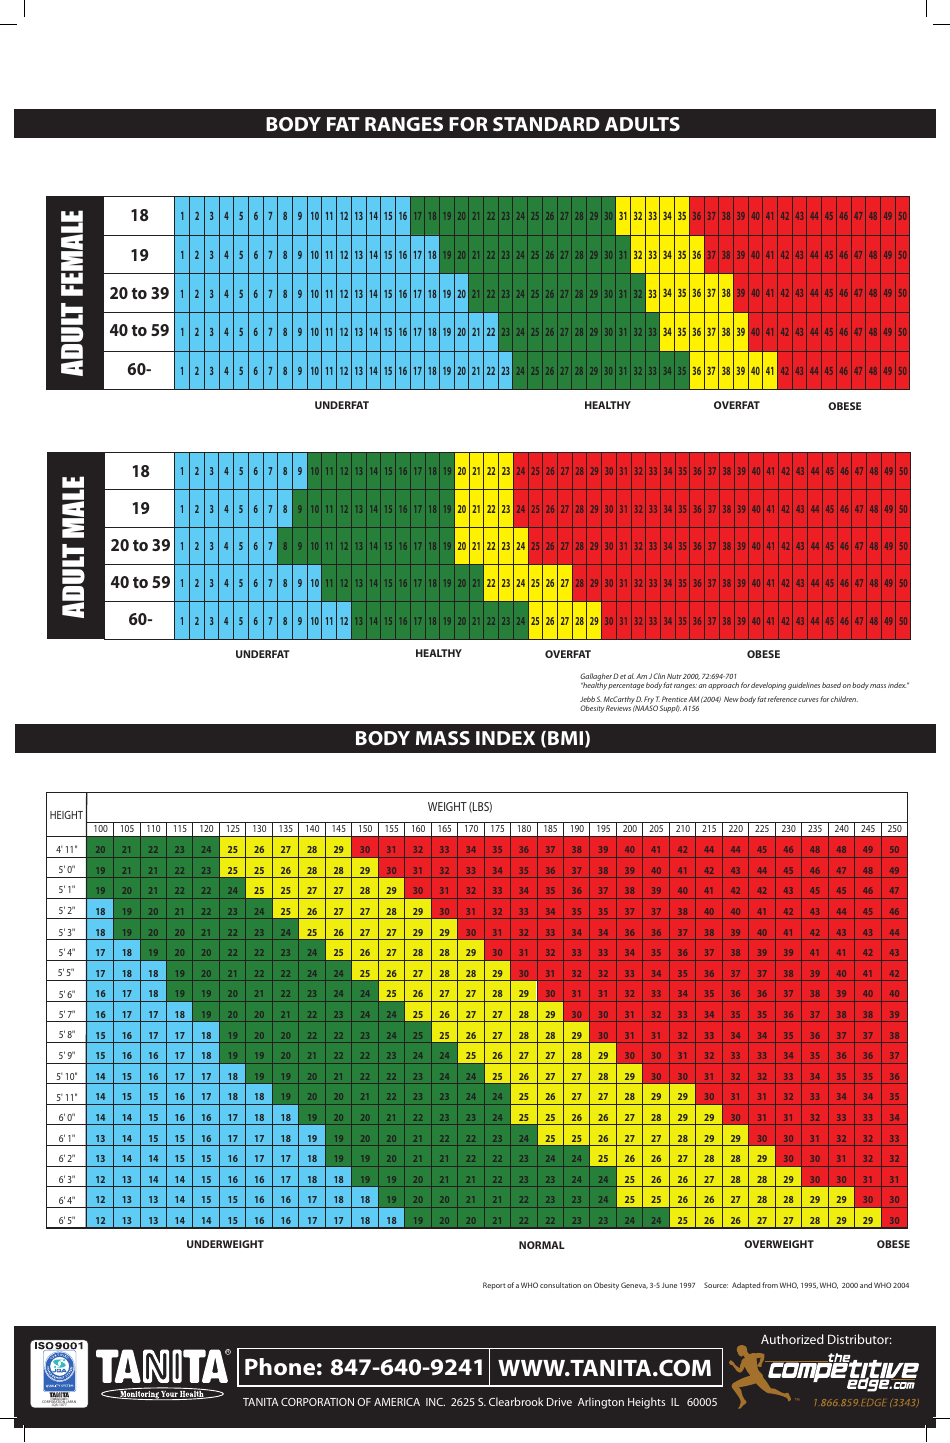 Body Fat Ranges for Standard Adults, Body Mass Index (BMI), Body Fat Ranges for Children Chart